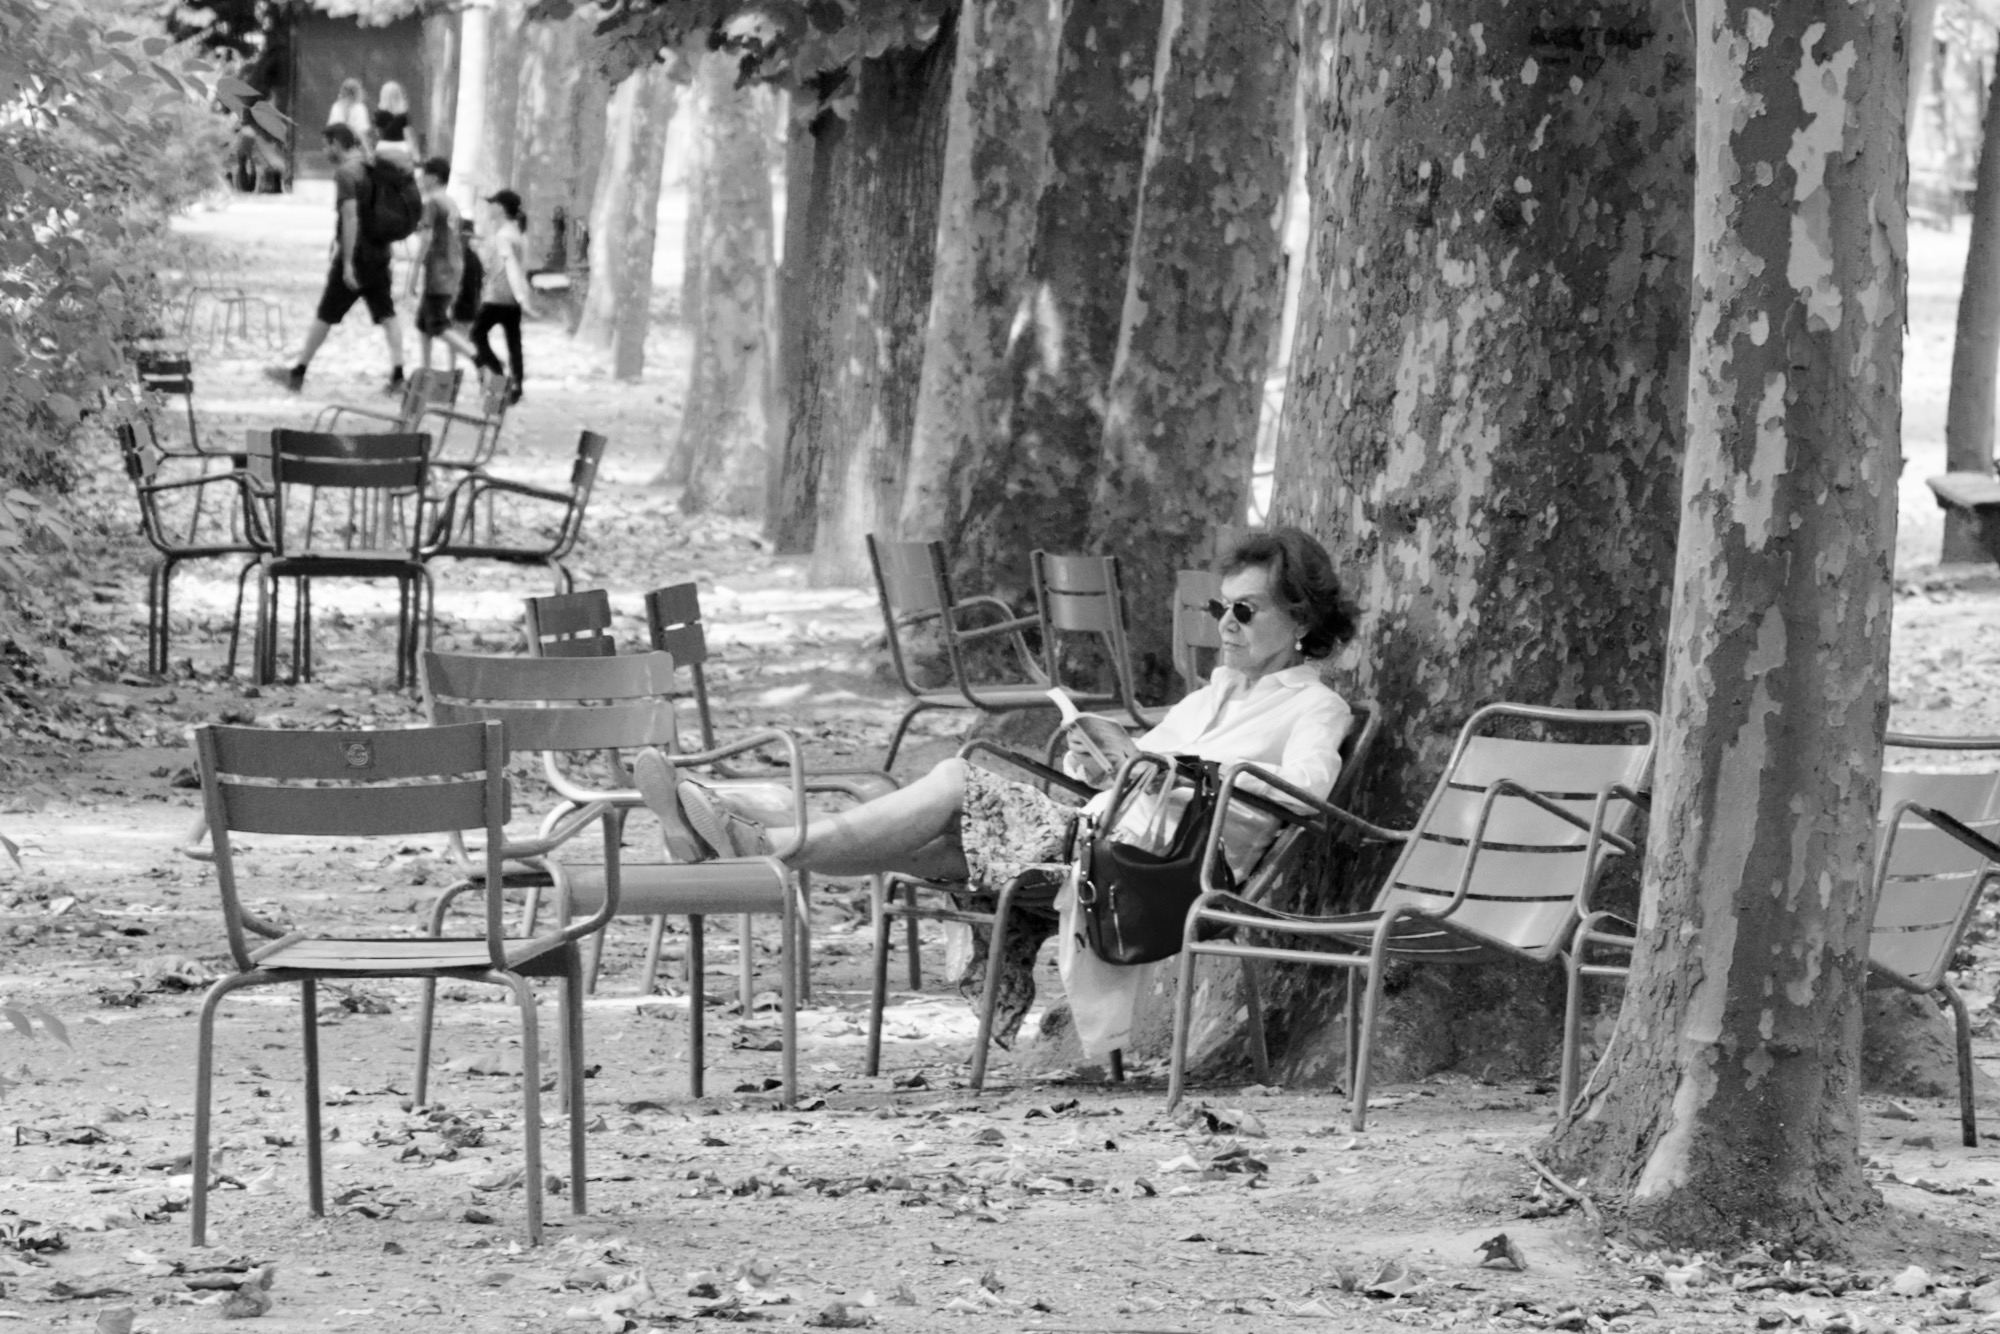 A black and white photo of a woman surrounded by chairs sat under a tree